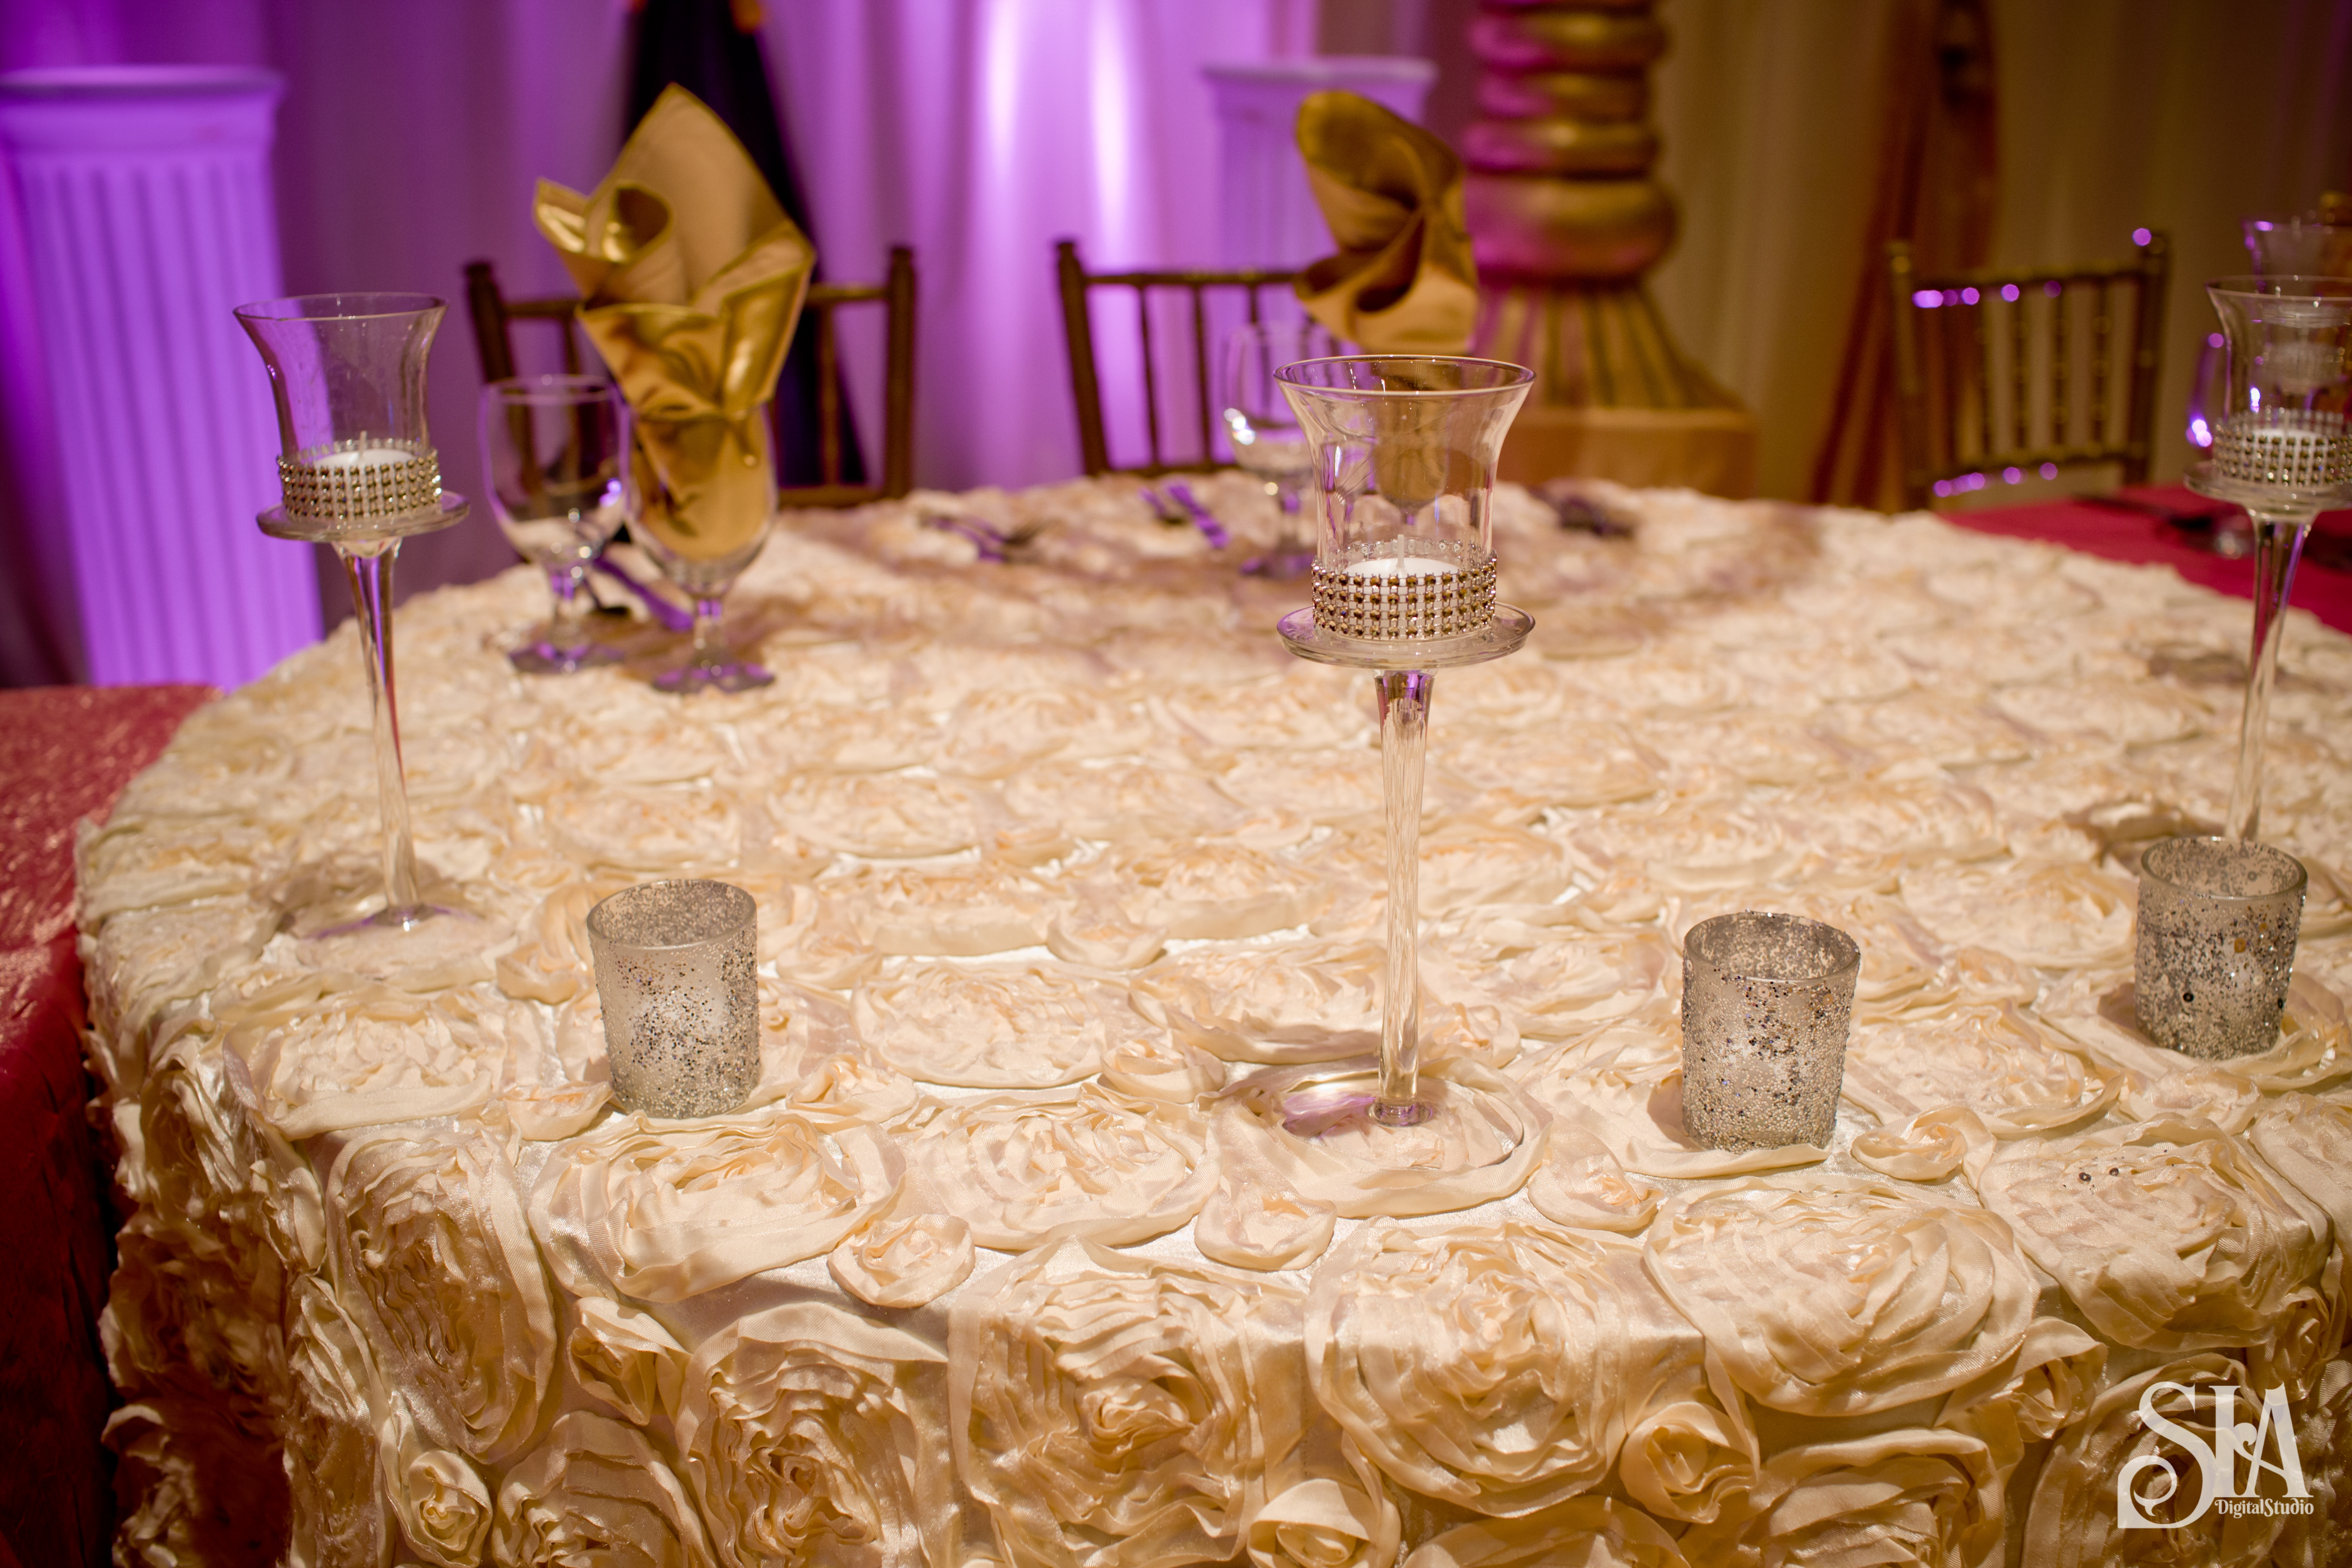 The Art of Wedding Decoration Themes: How to Style a Spectacular Wedding Venue!